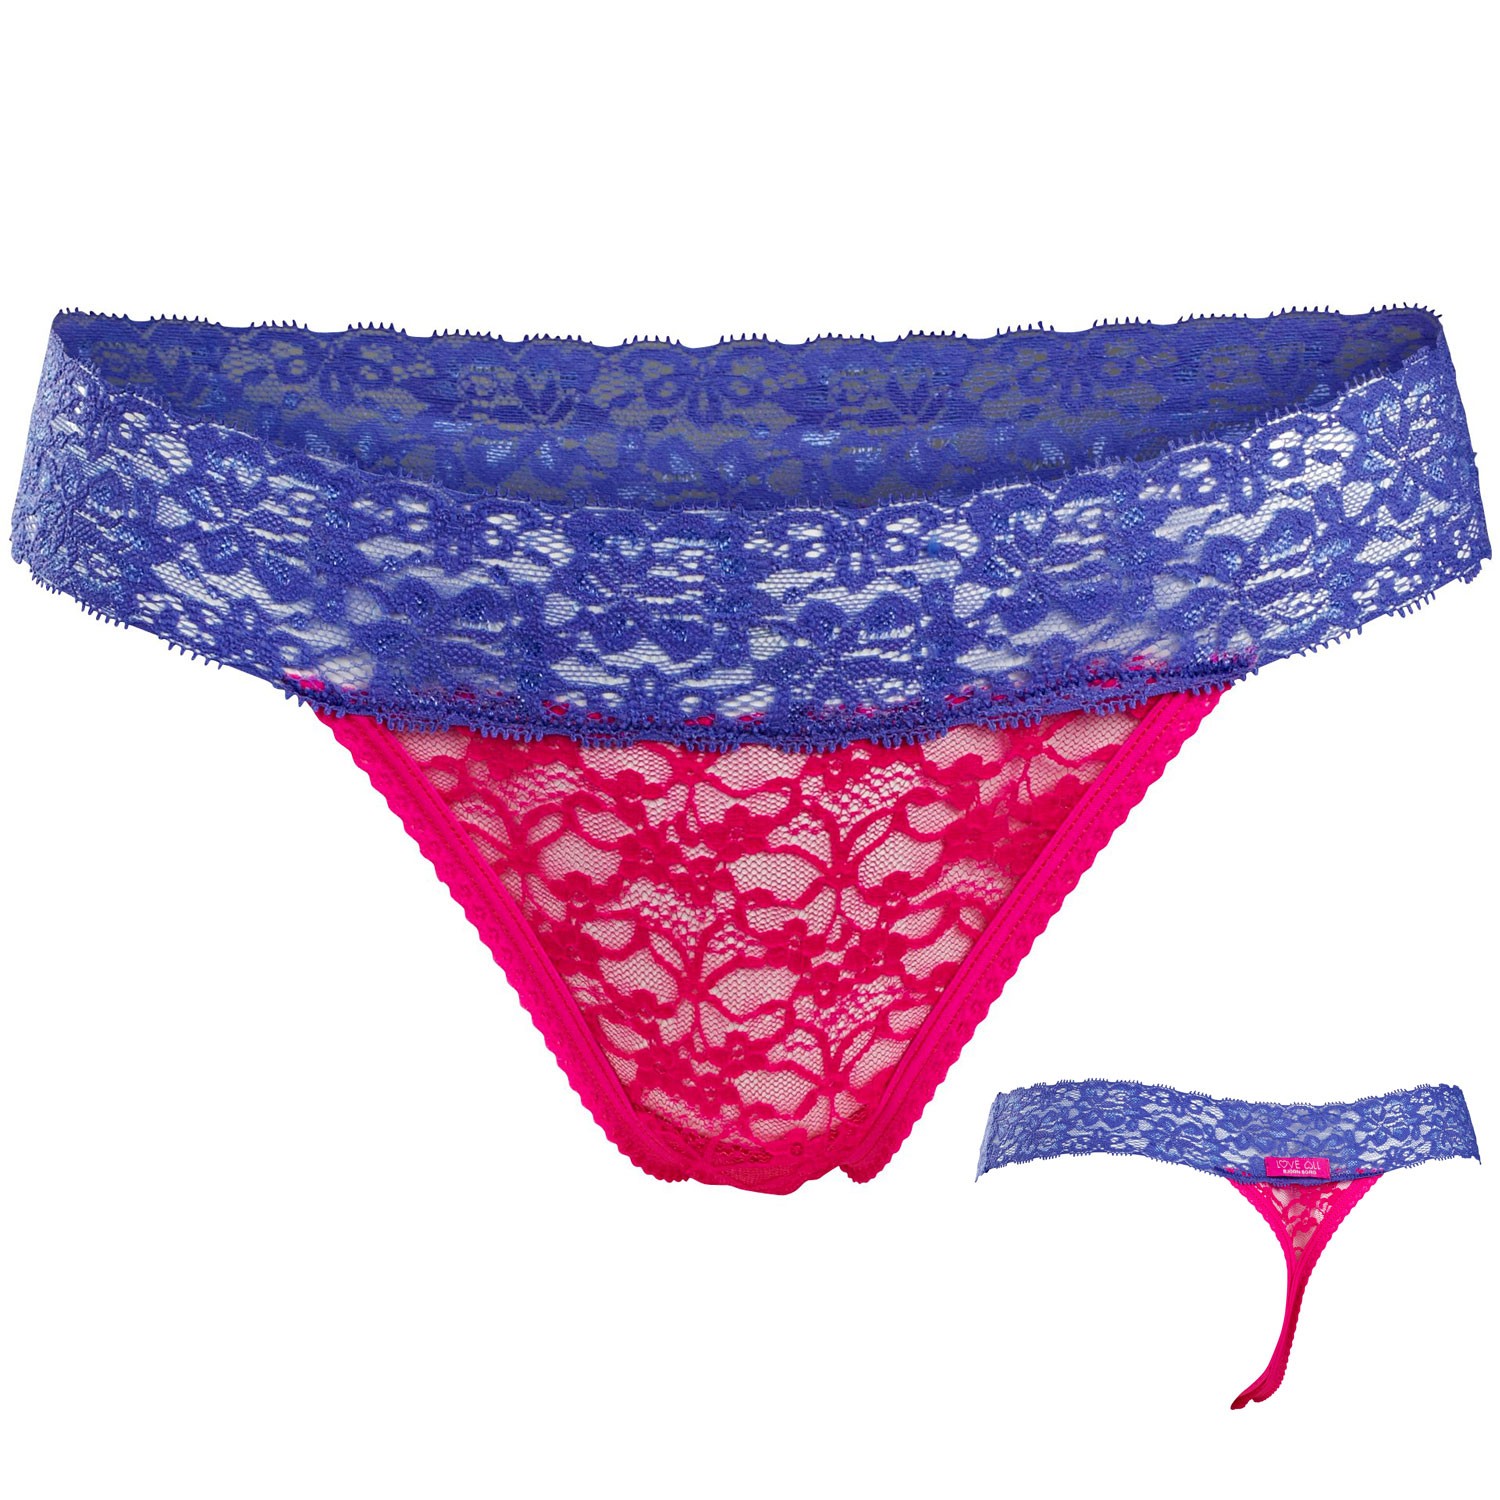 Björn Borg Love All Lace String Pink/Purple